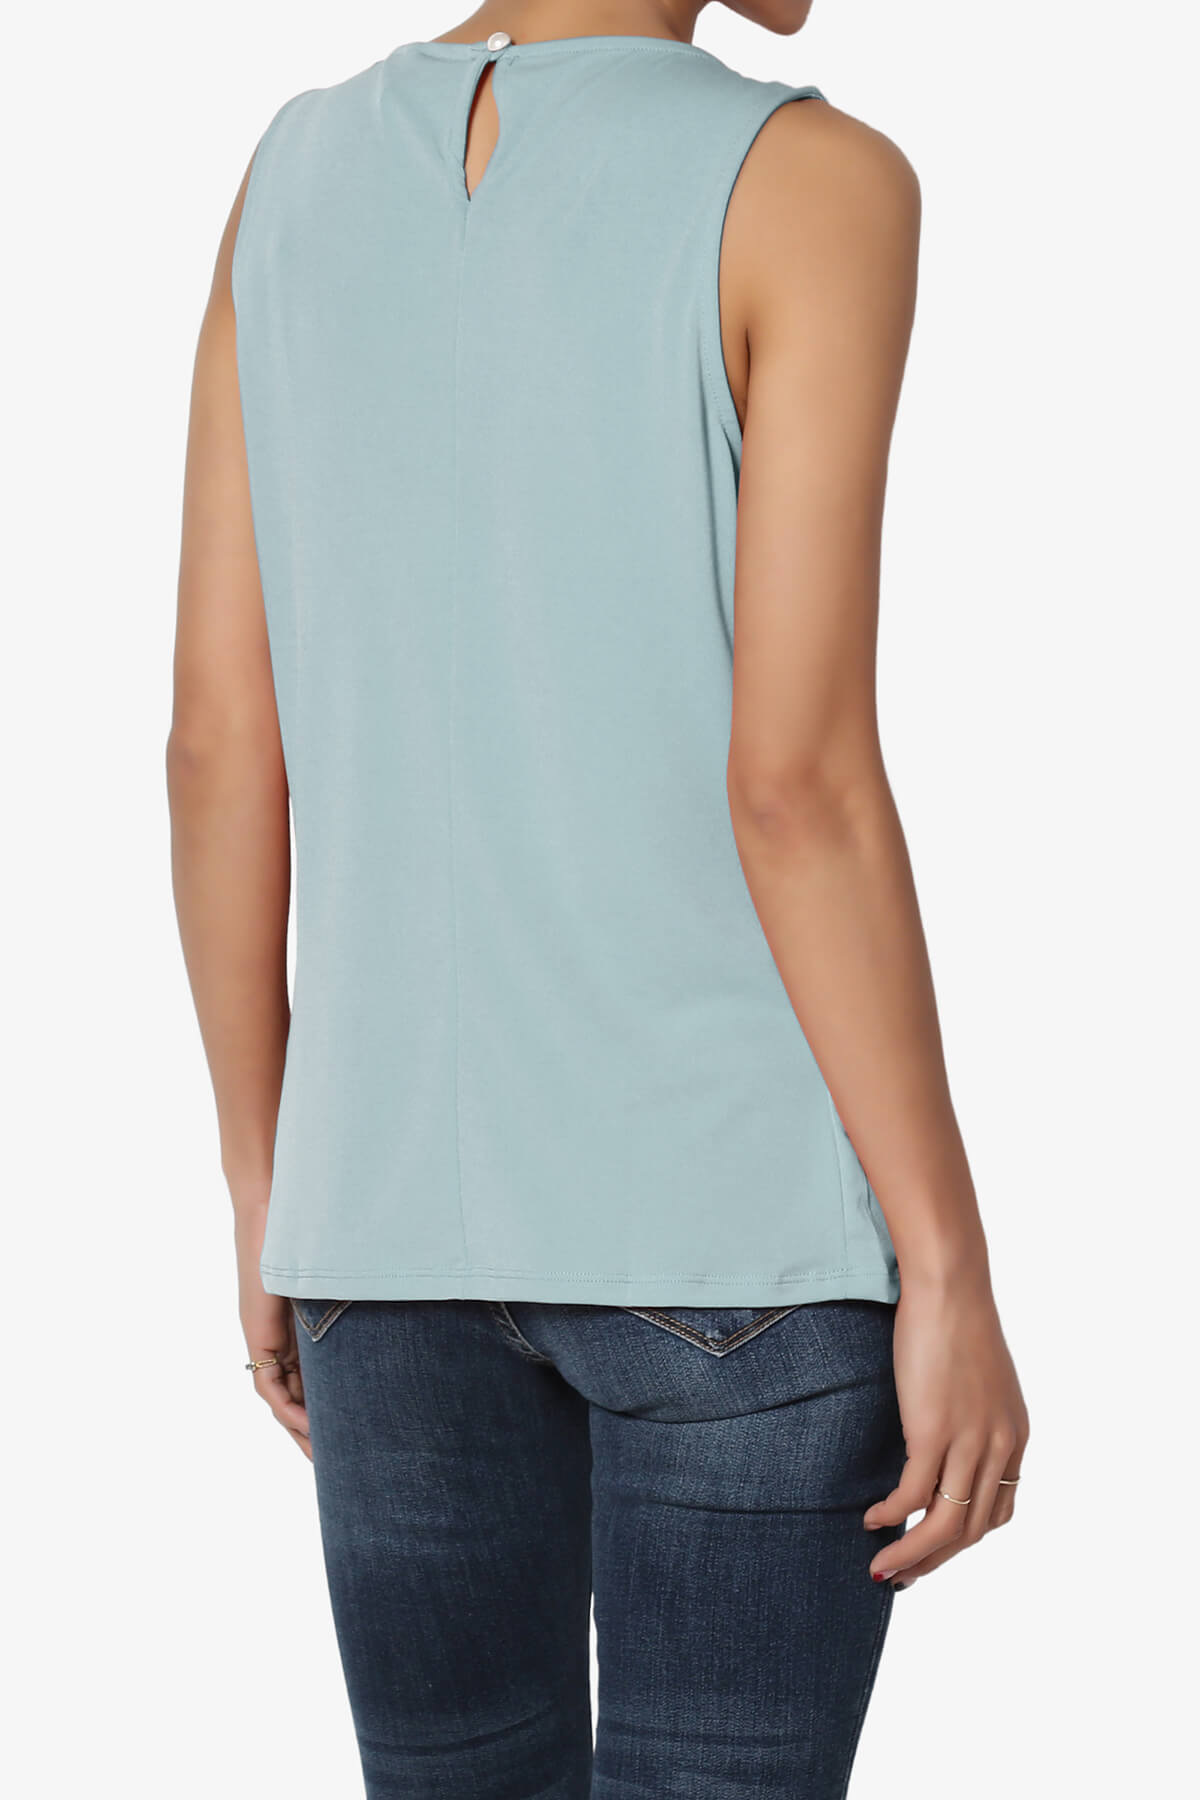 Load image into Gallery viewer, Chaffee Pleat Neck Tank Top DUSTY BLUE_4
